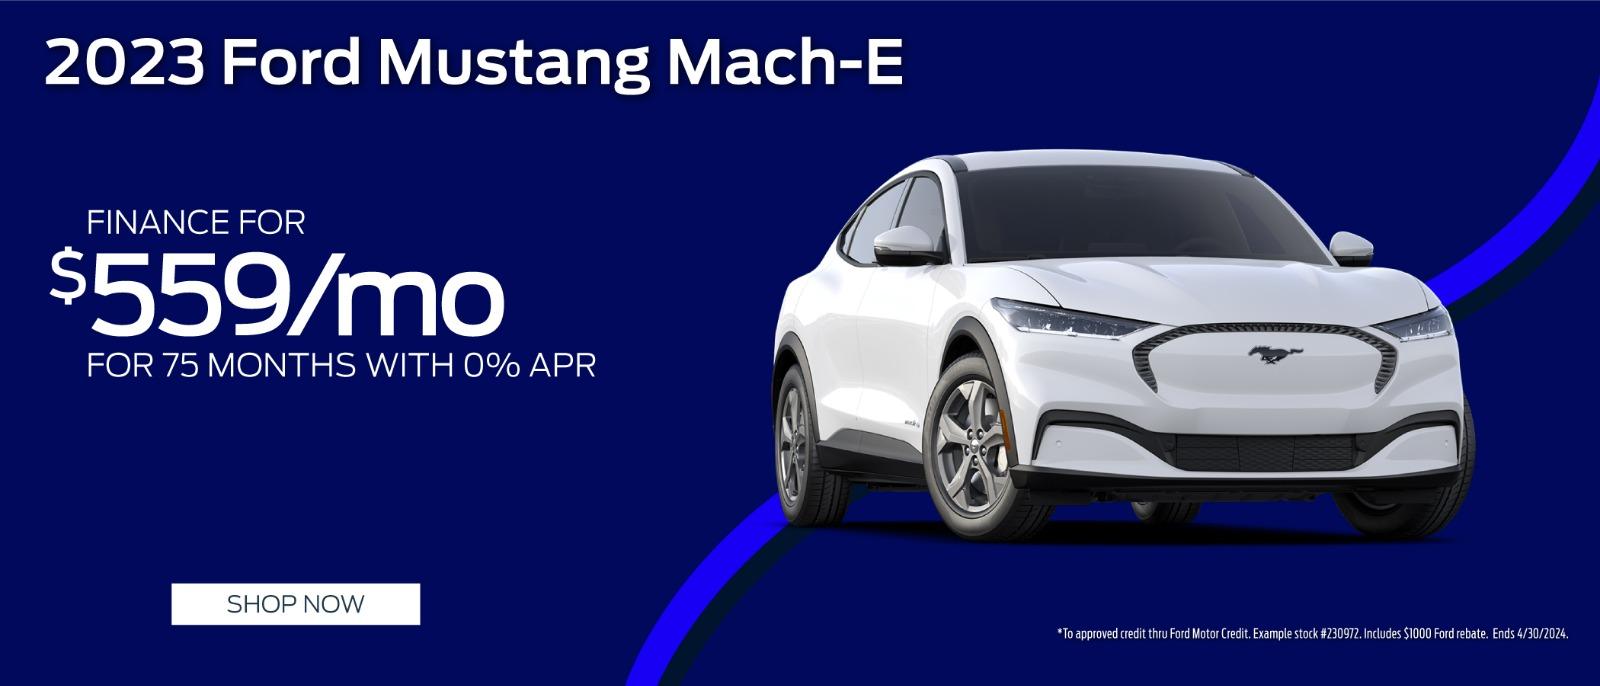 2023 Ford Mustang Mach-E Finance for $559 per month for 75 months with 0%apr